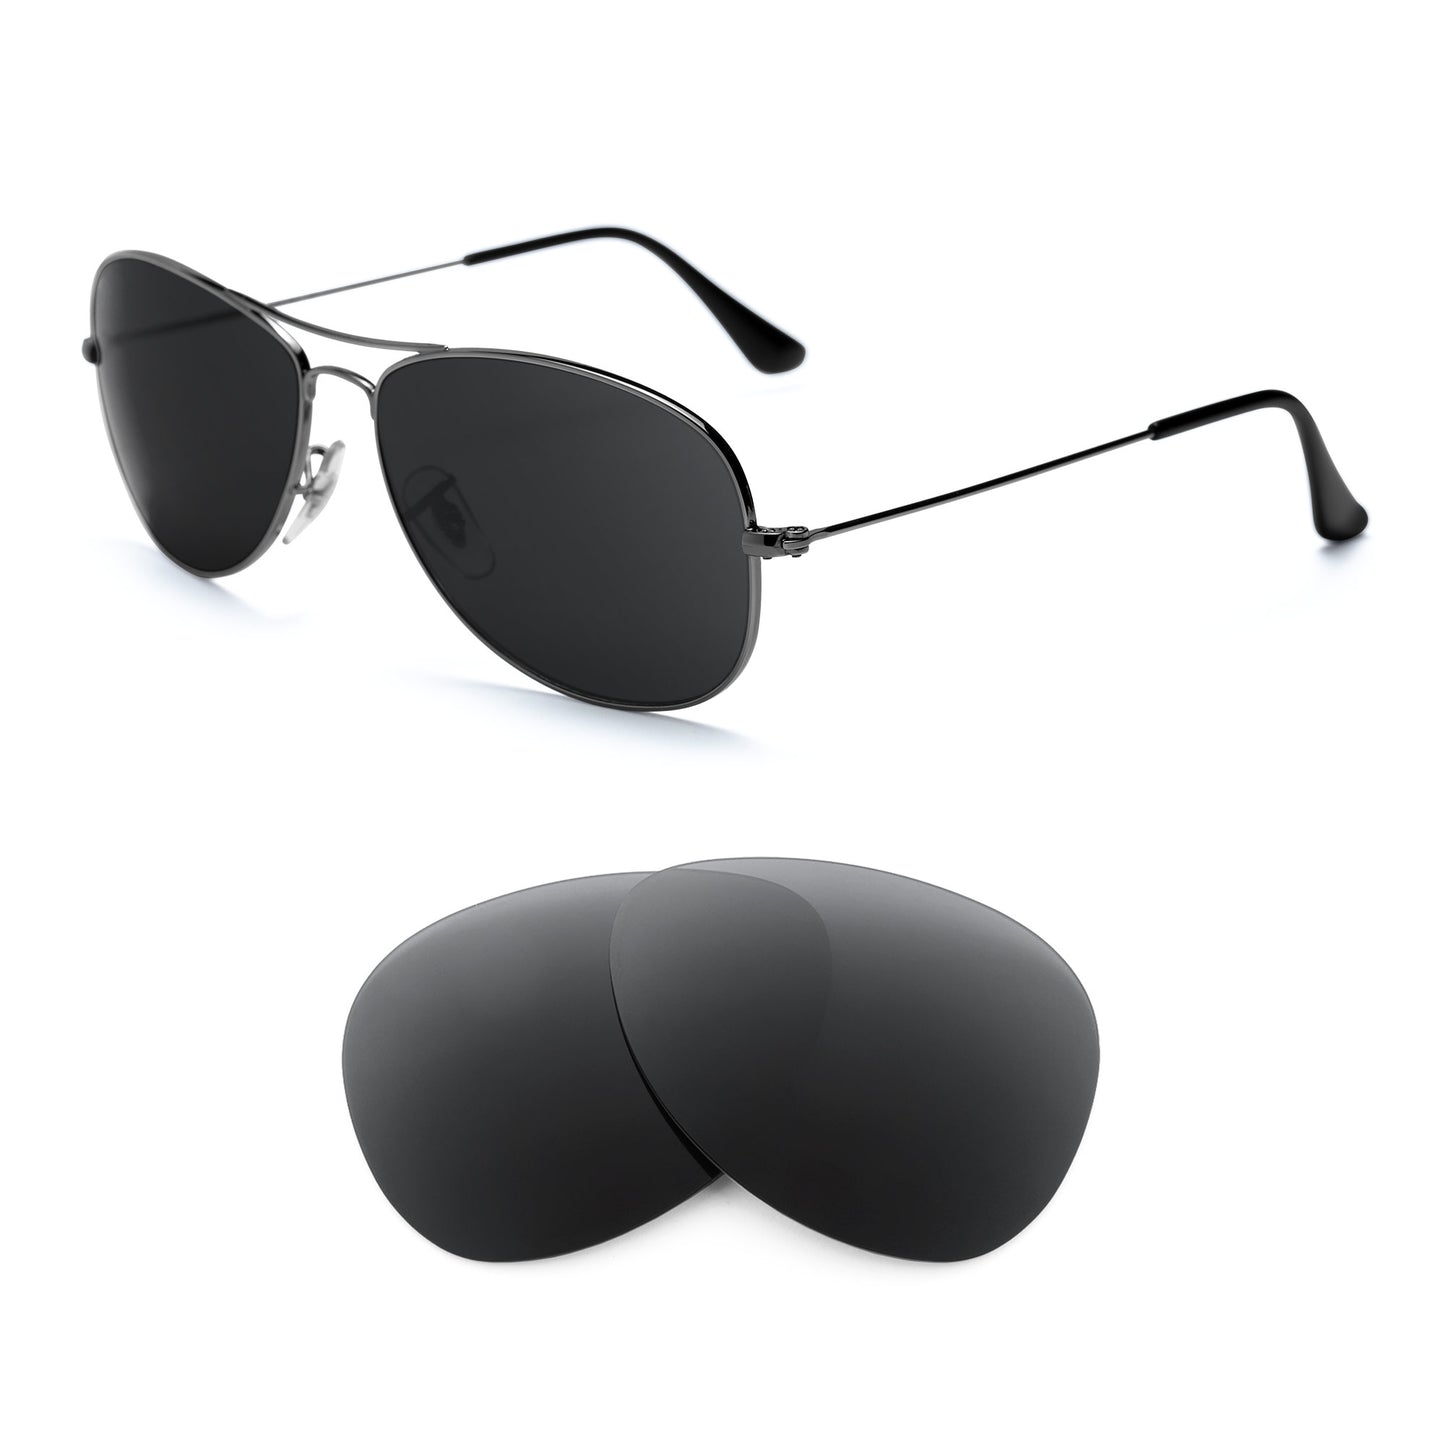 Ray-Ban Cockpit RB3362 59mm sunglasses with replacement lenses